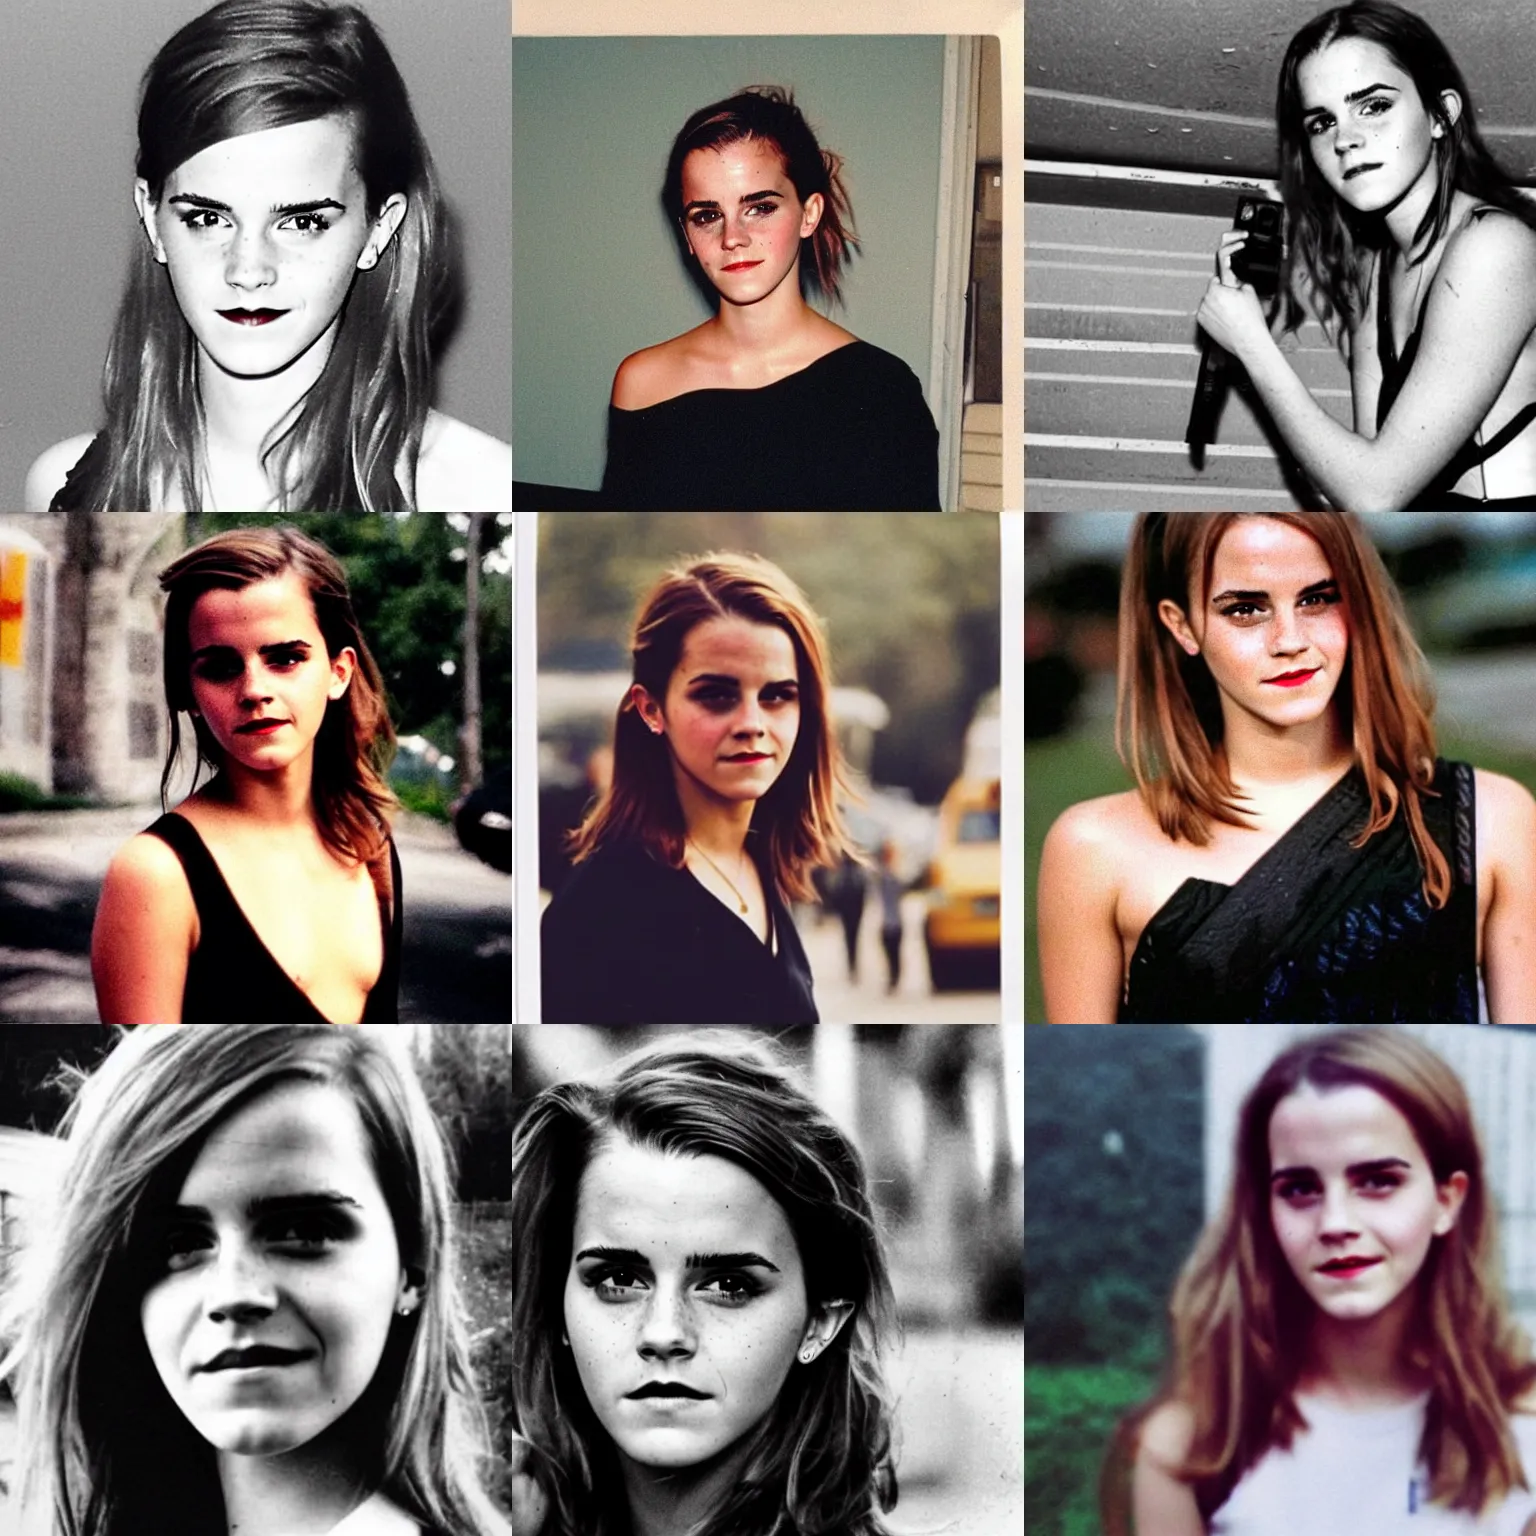 Prompt: A disposable camera picture of an old photograph of Emma Watson found in the trash